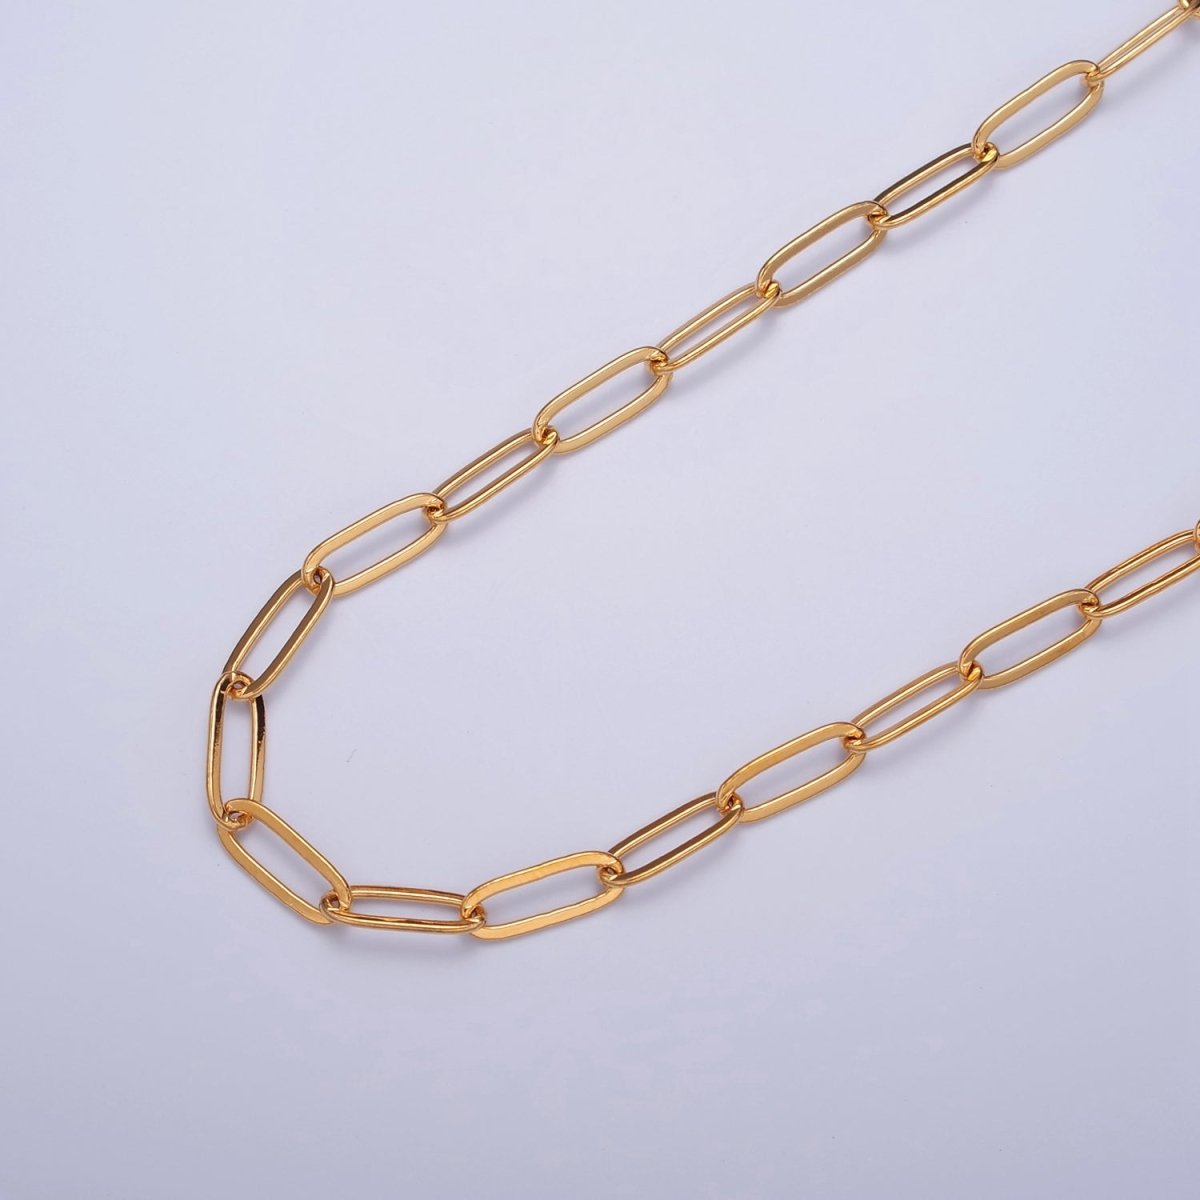 PaperClip Unfinished Chain, 12mm x 4.5mm, 24k Gold Filled Chain 19.5 inch long | WA-1385 Clearance Pricing - DLUXCA